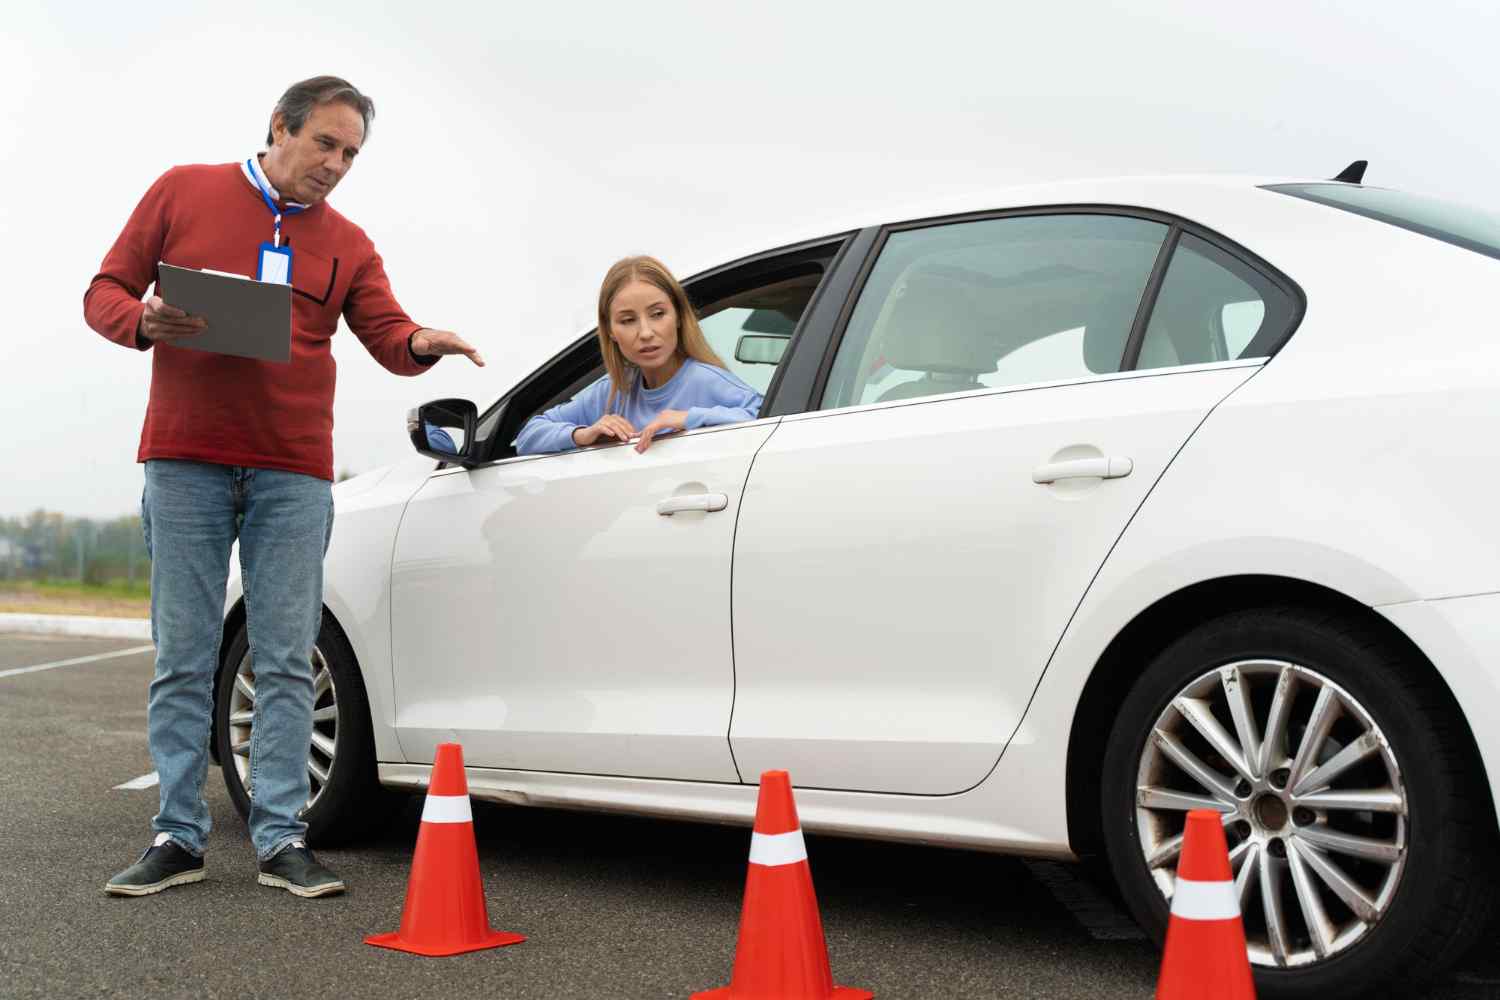 Primary Features of Intensive Driving Courses